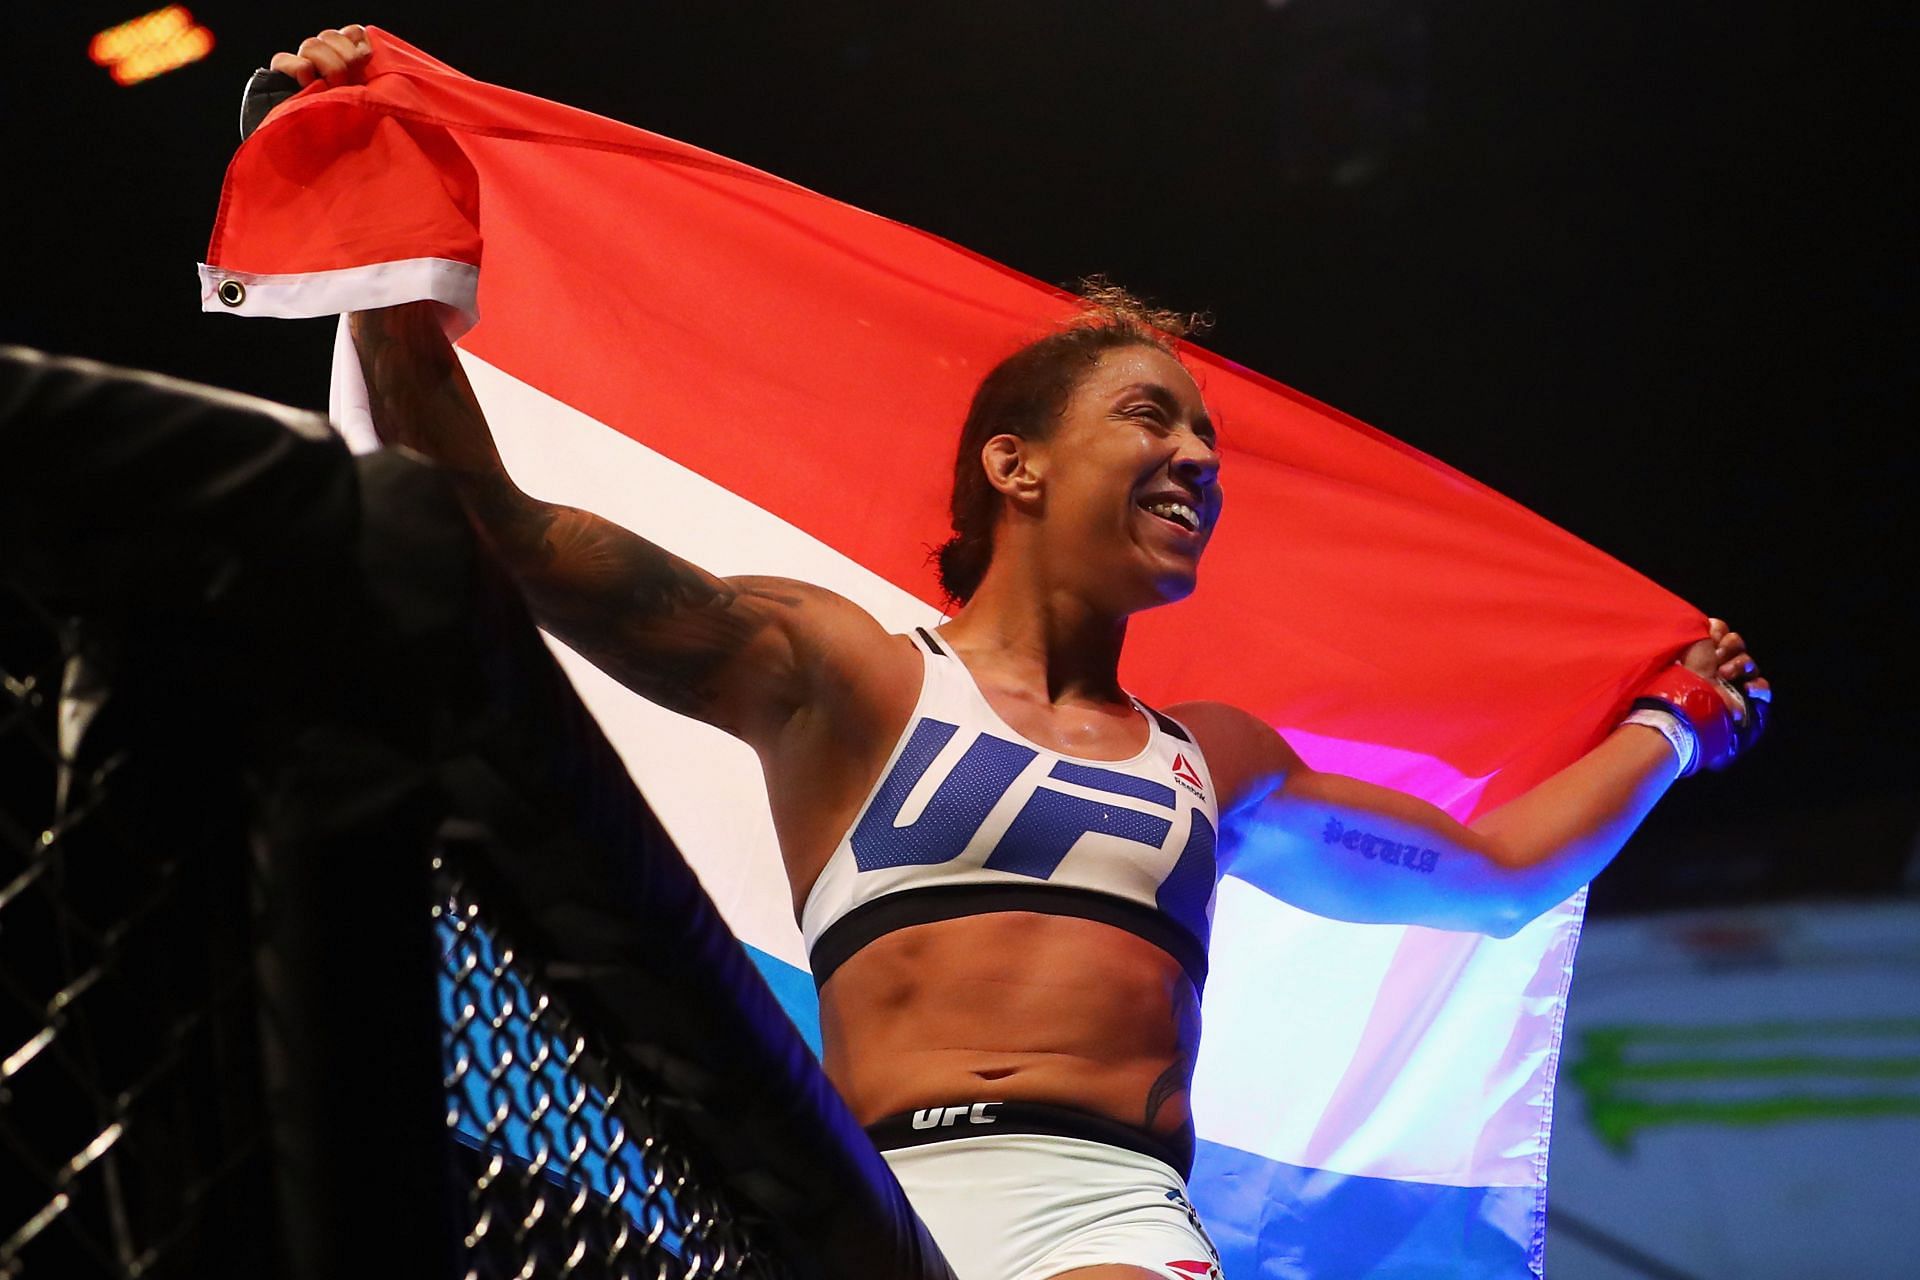 Germaine de Randamie&#039;s time as featherweight champion did not go down well with fans